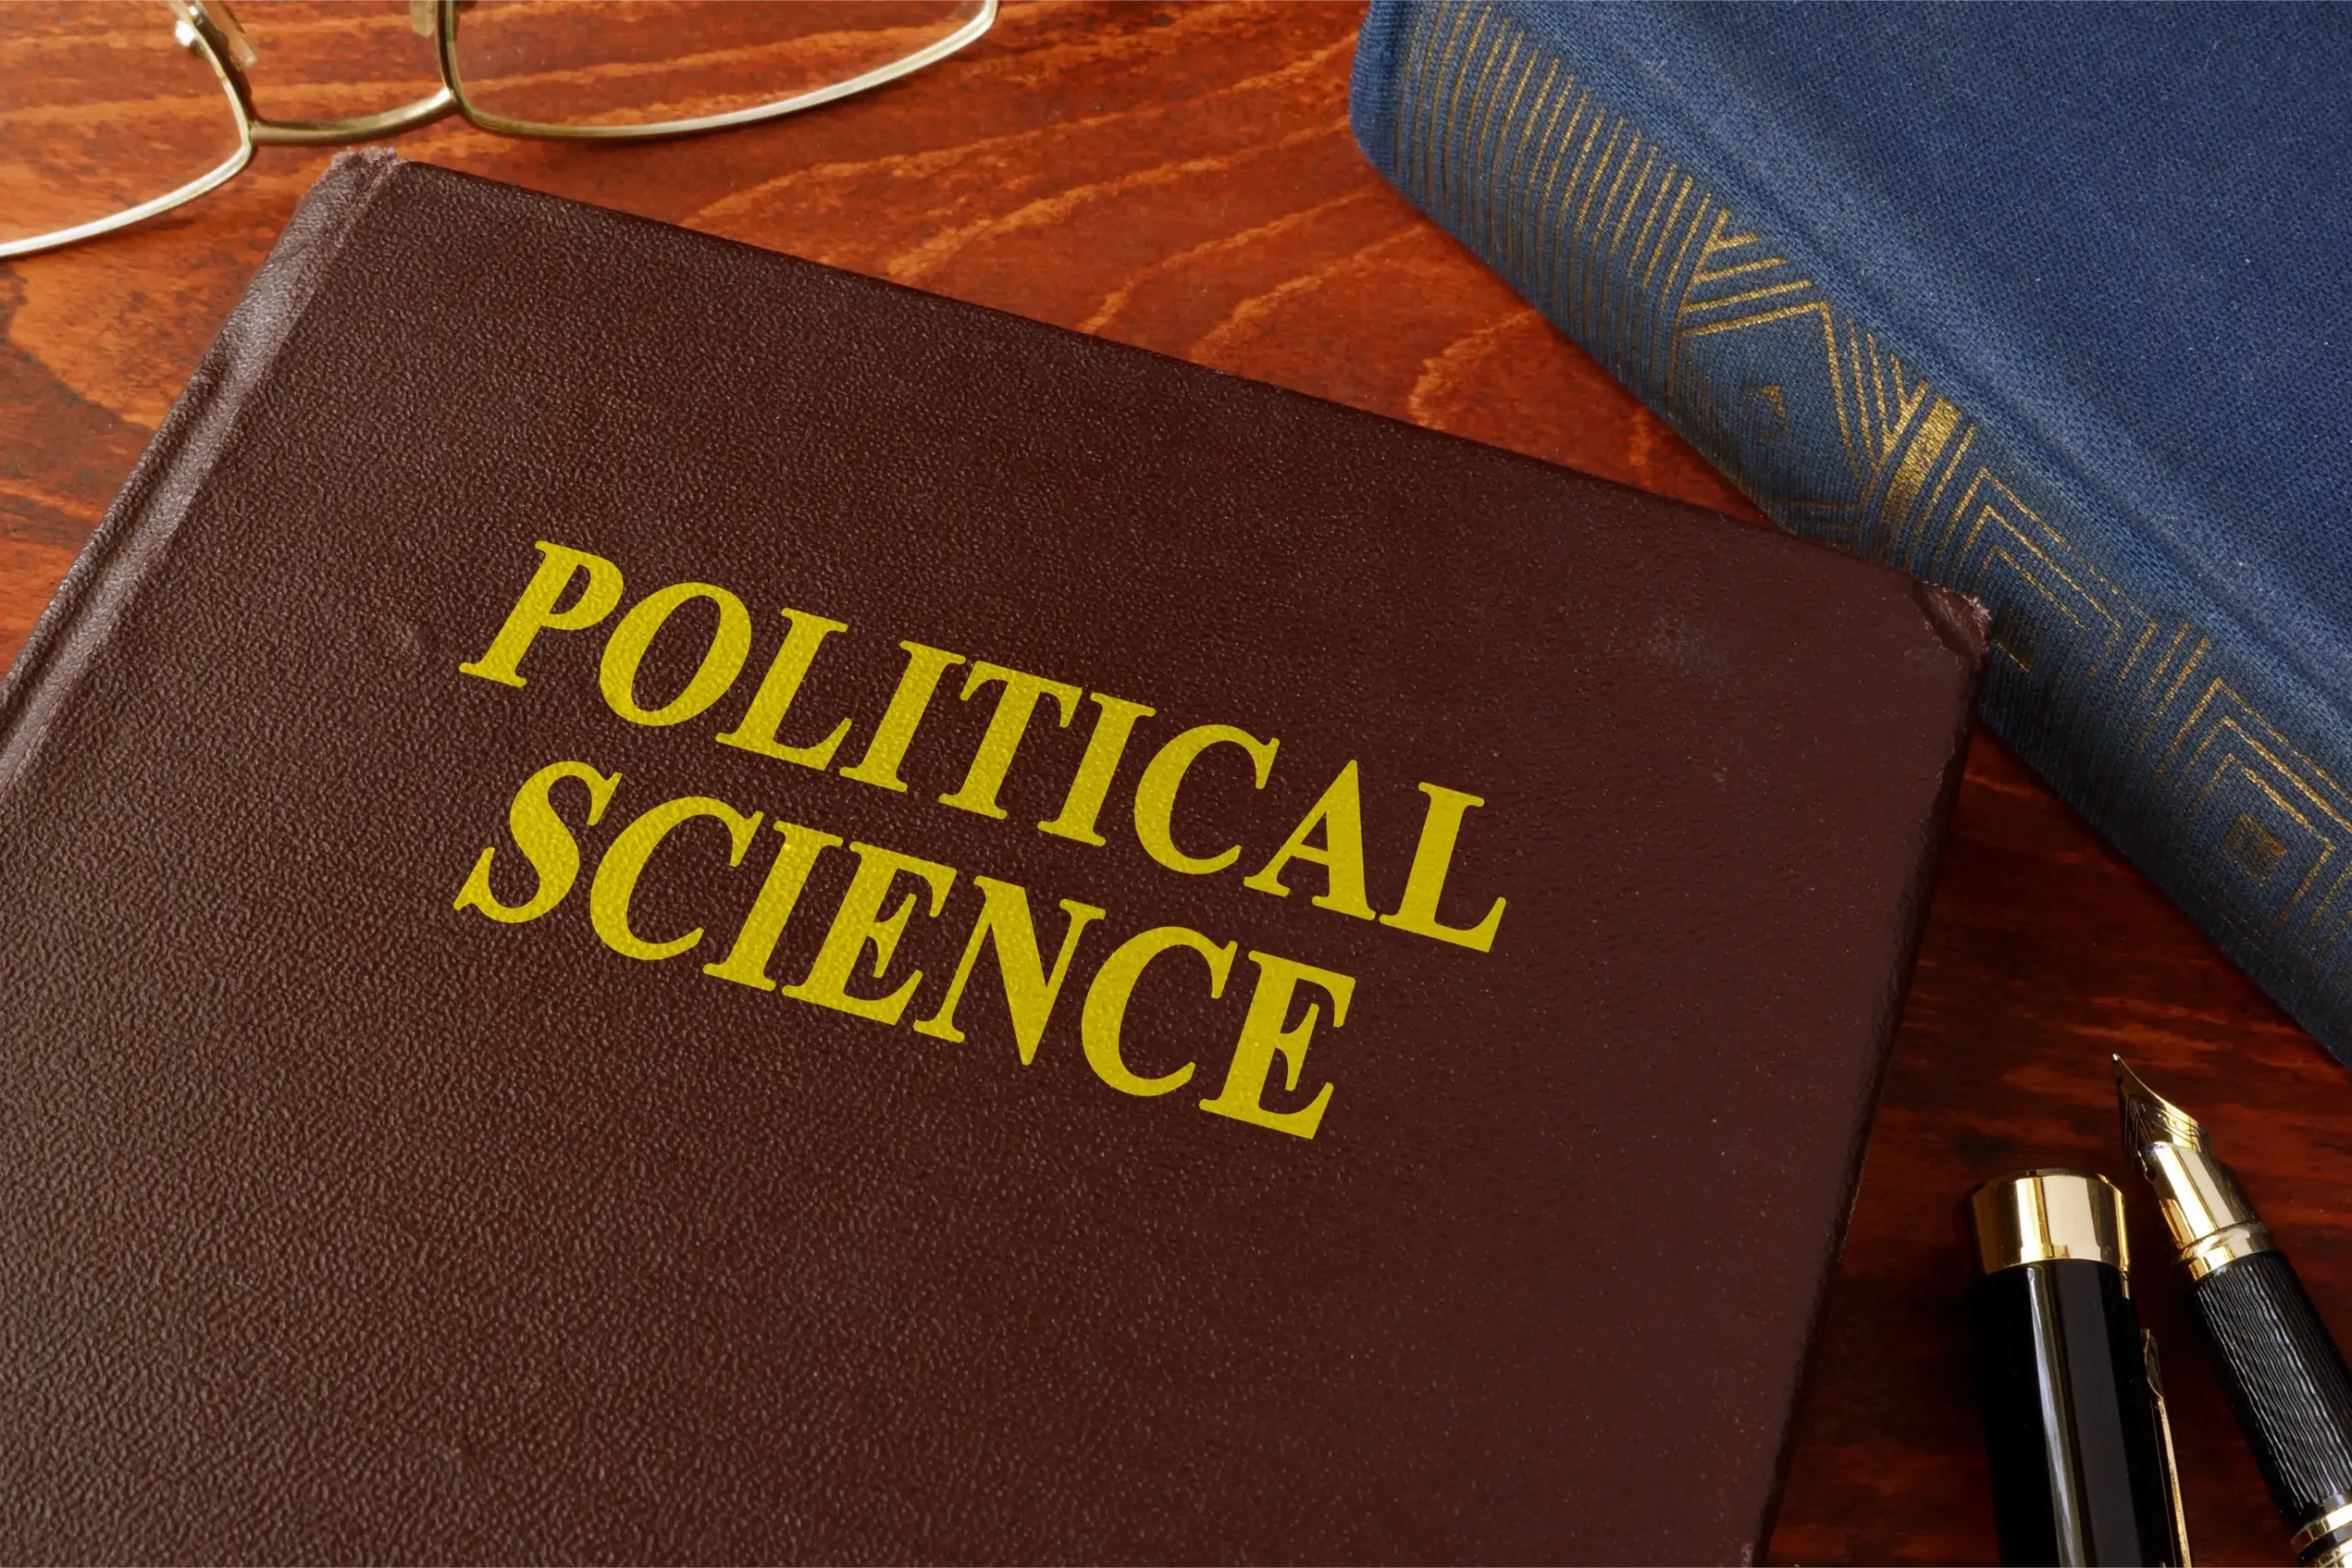 9 Political Science Extracurricular Activities for High School Students